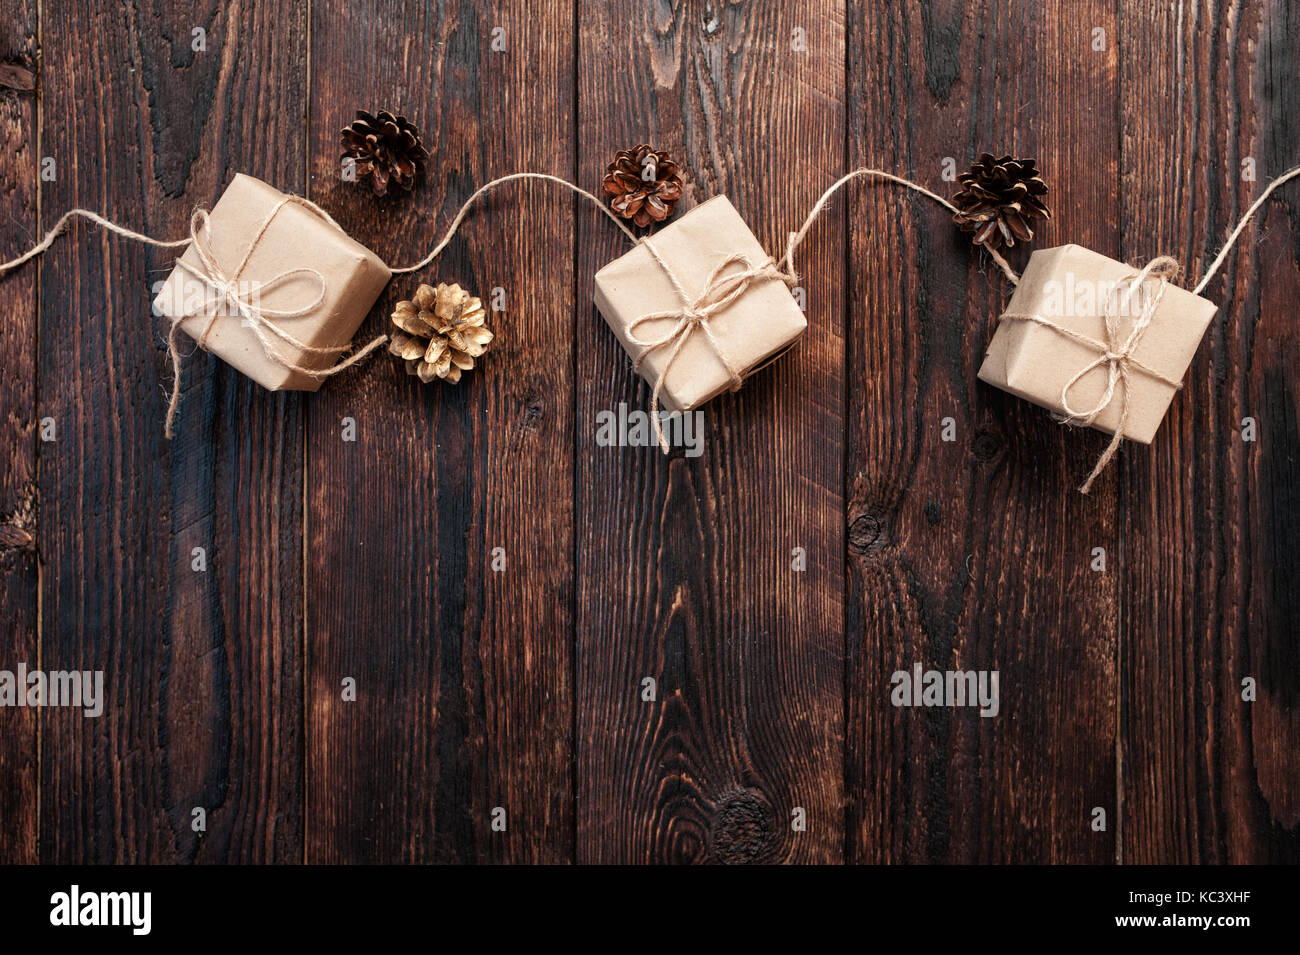 Christmas composition from gift boxes and cones on a wooden background Stock Photo